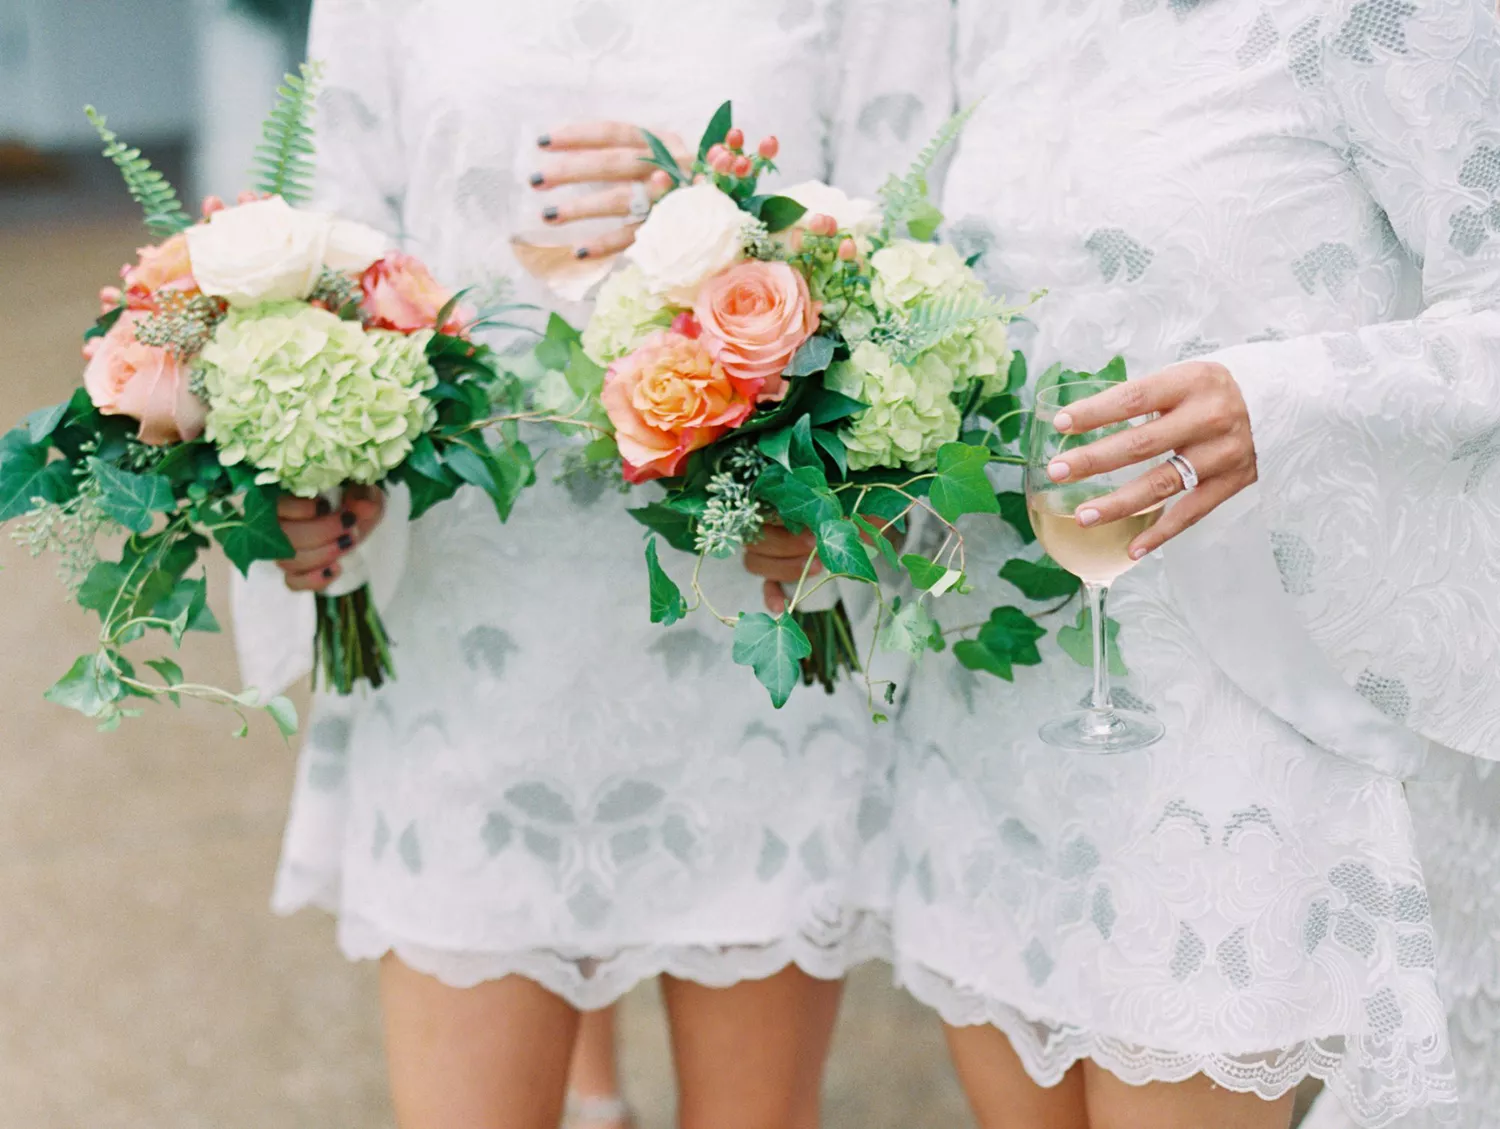 Eight Wedding Planners Weigh In: Can a Guest Wear White to the Wedding?